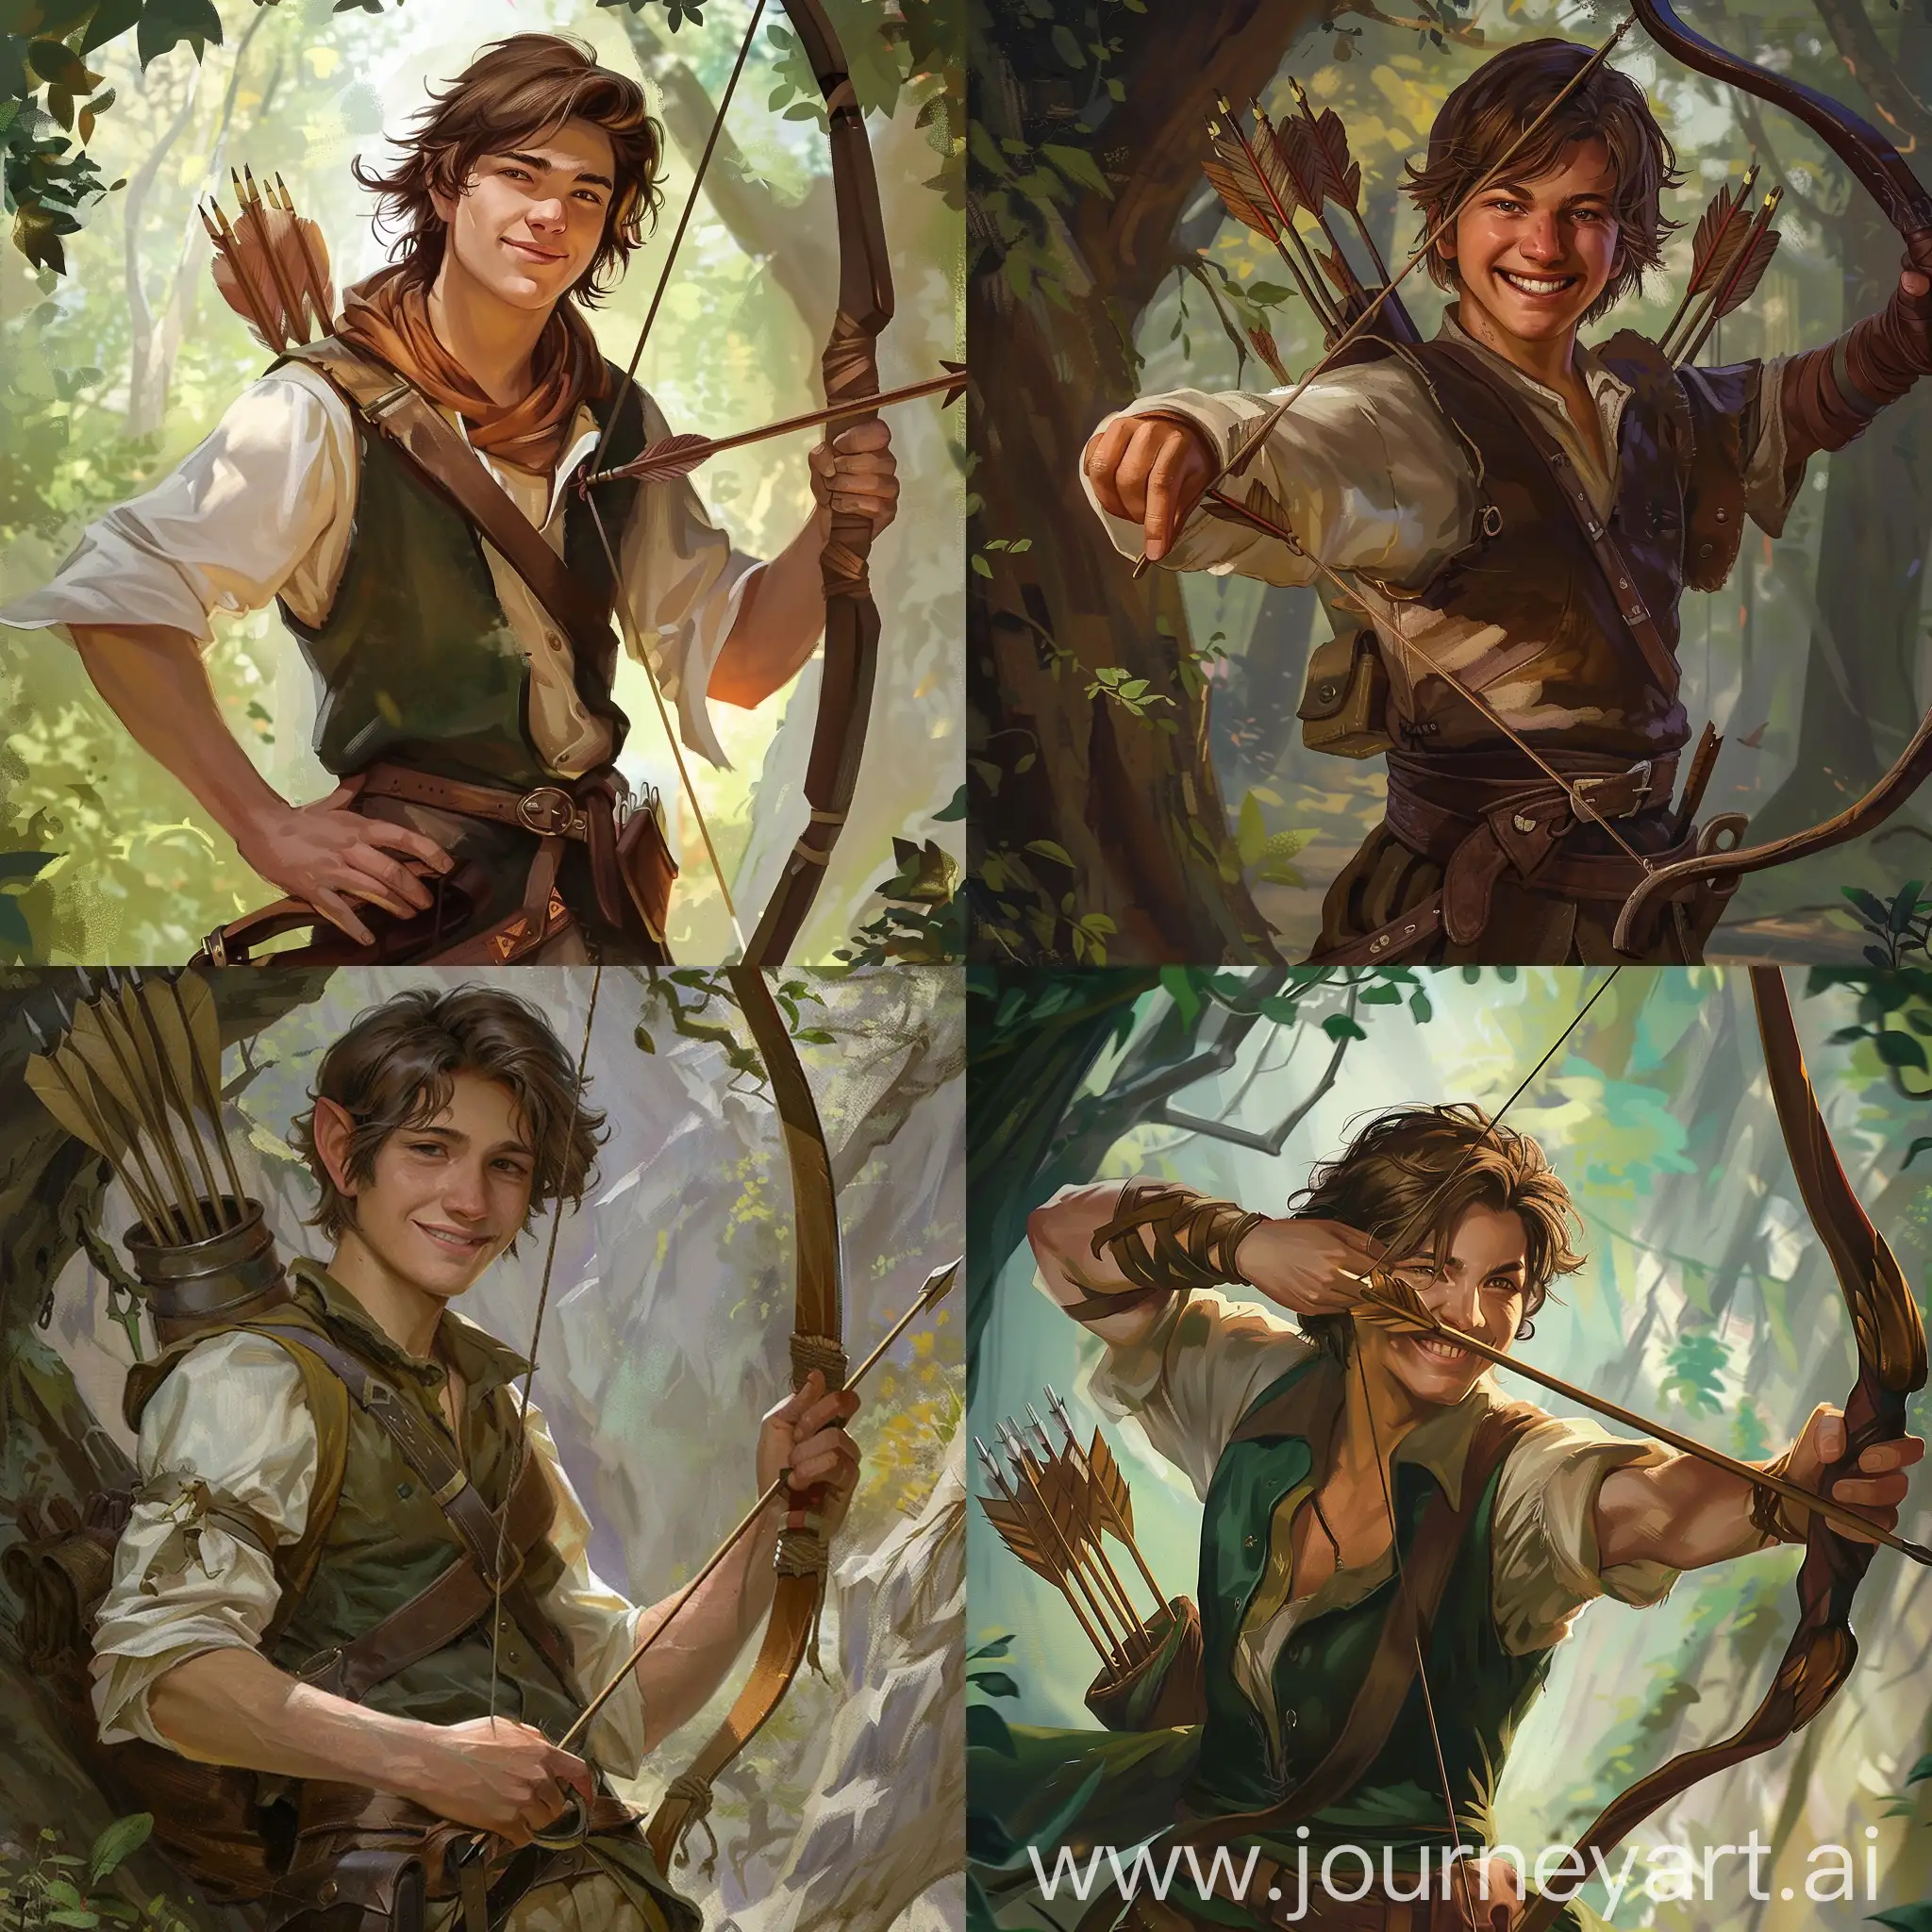 Joyful-Young-Male-Huntsman-with-Longbow-and-Quiver-in-Fantasy-Setting